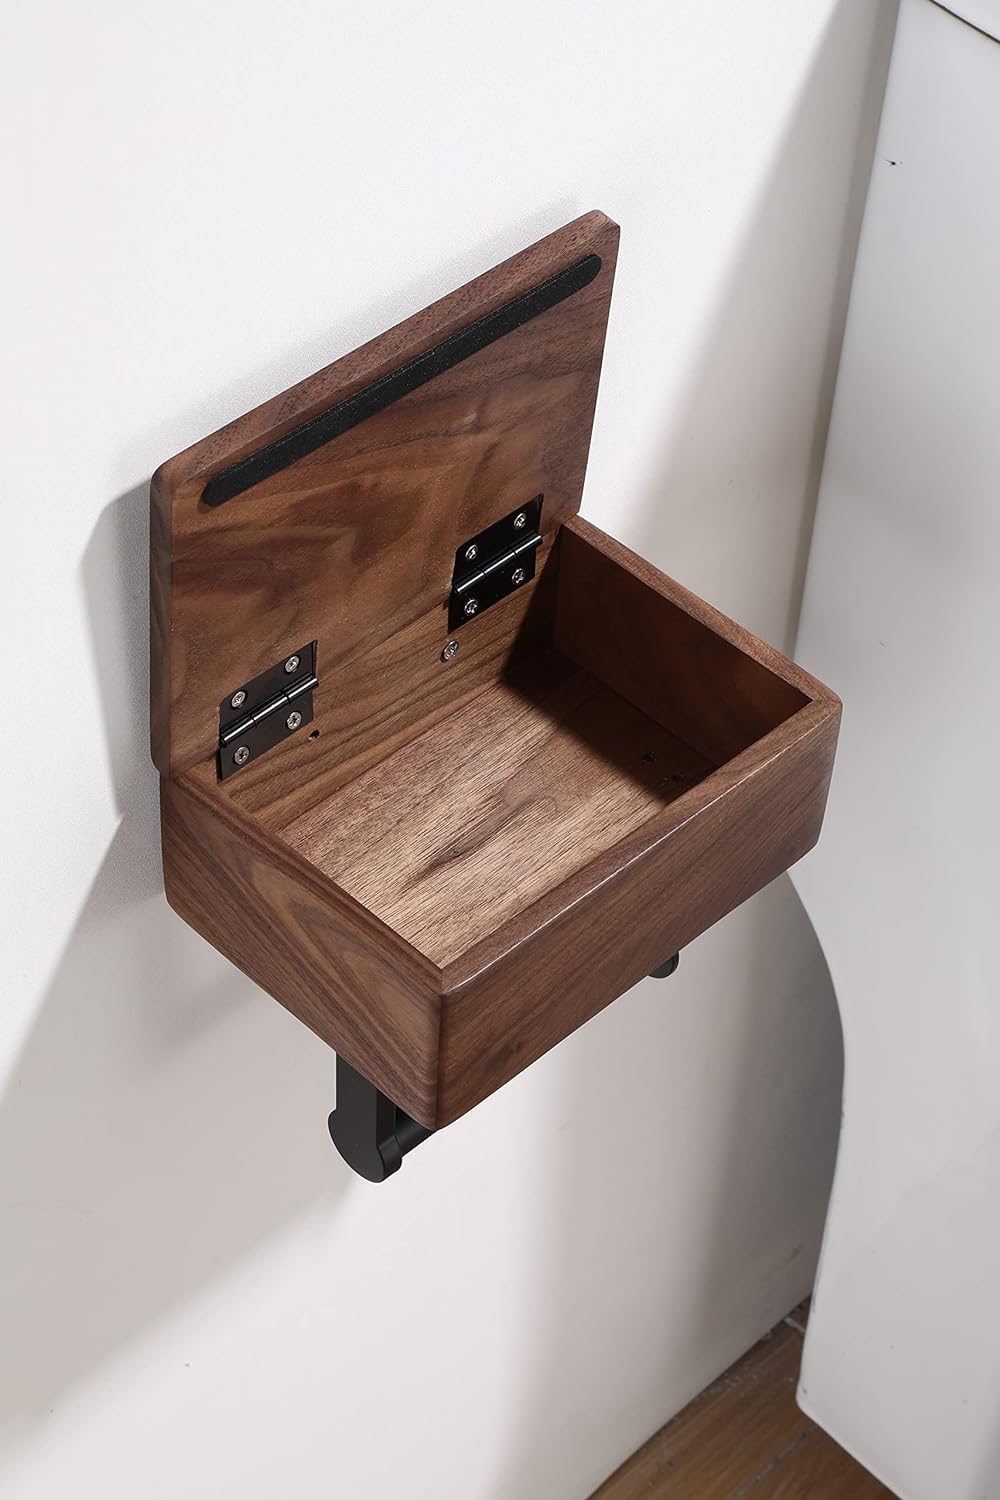 Day Moon Designs Wood Toilet Paper Holder-Wooden Wall Mount Toilet